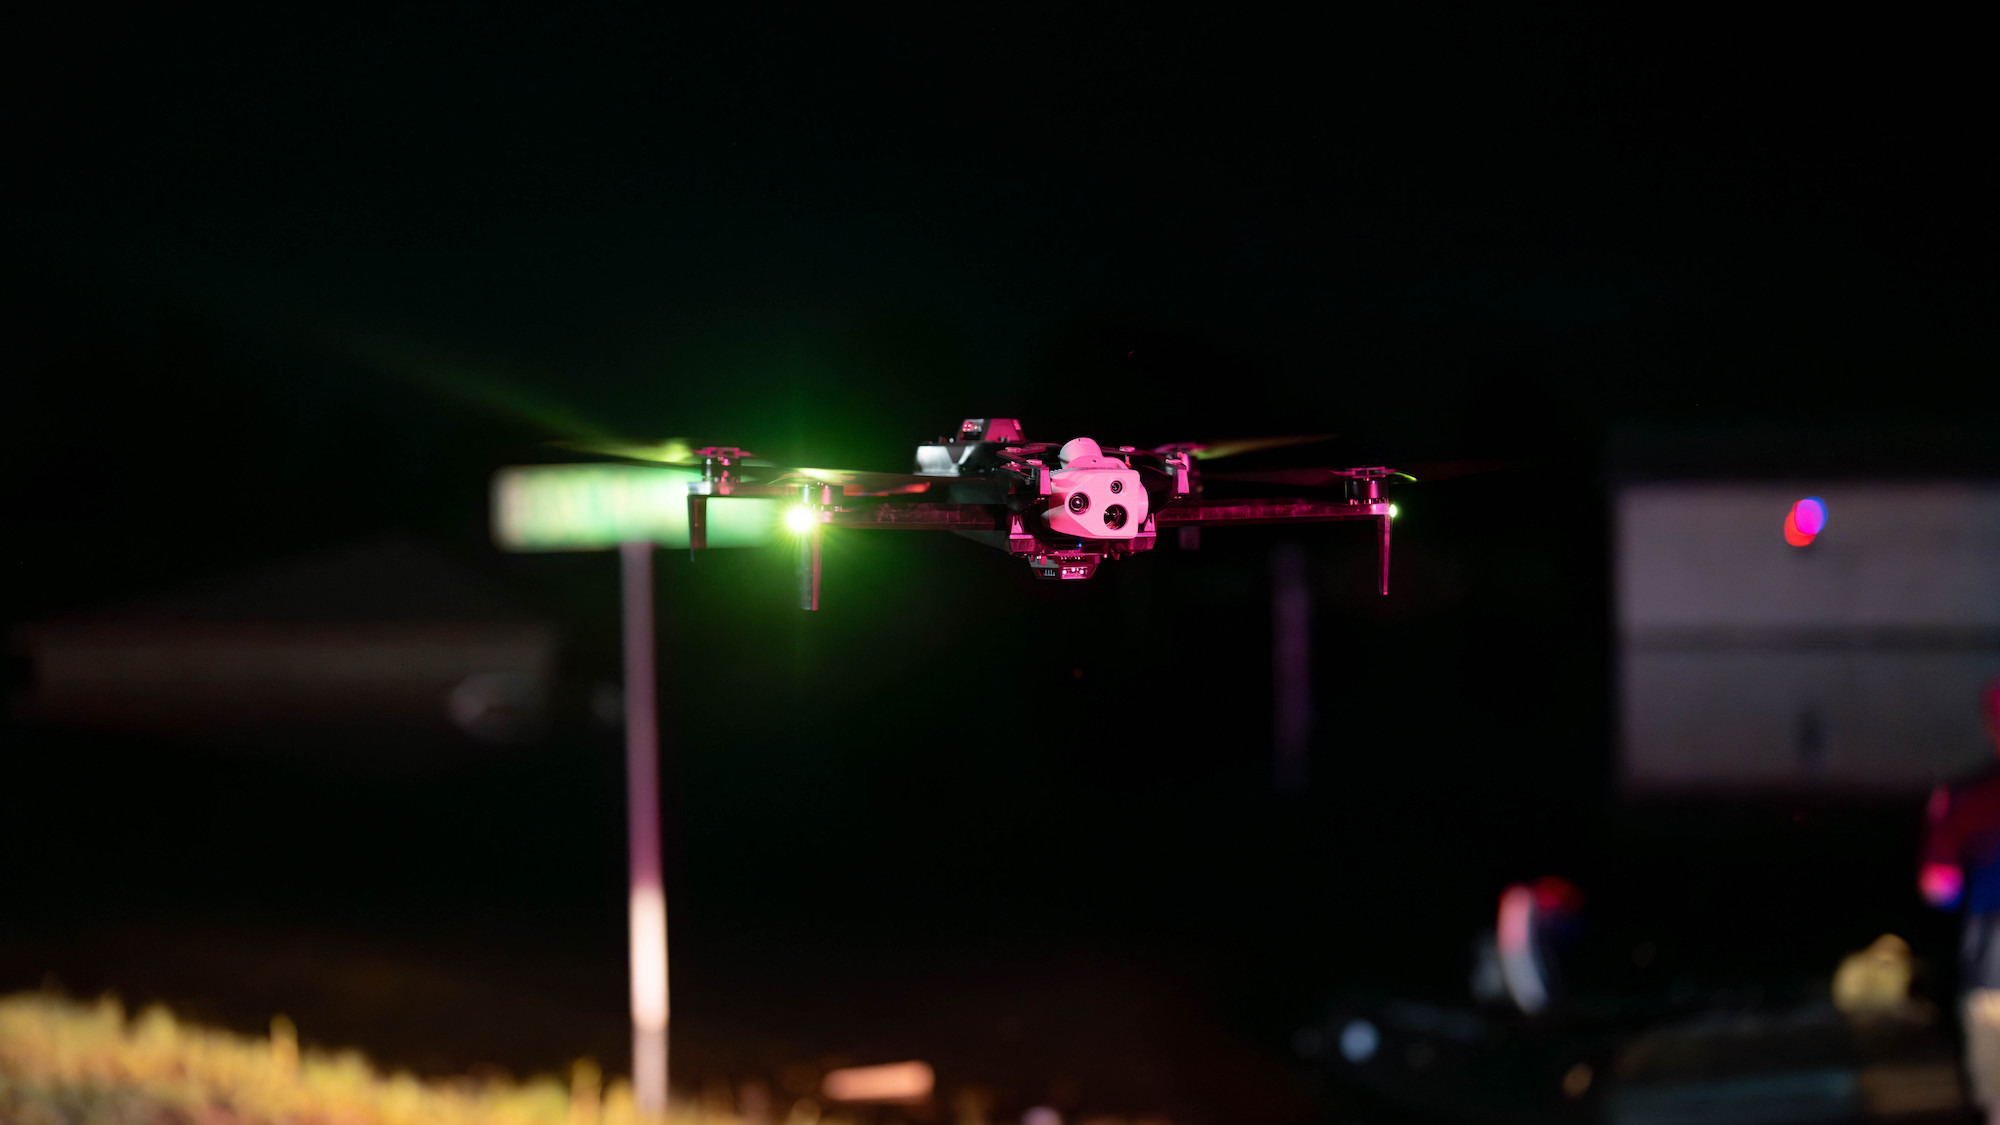 A new drone might help cops stop high-speed car chases